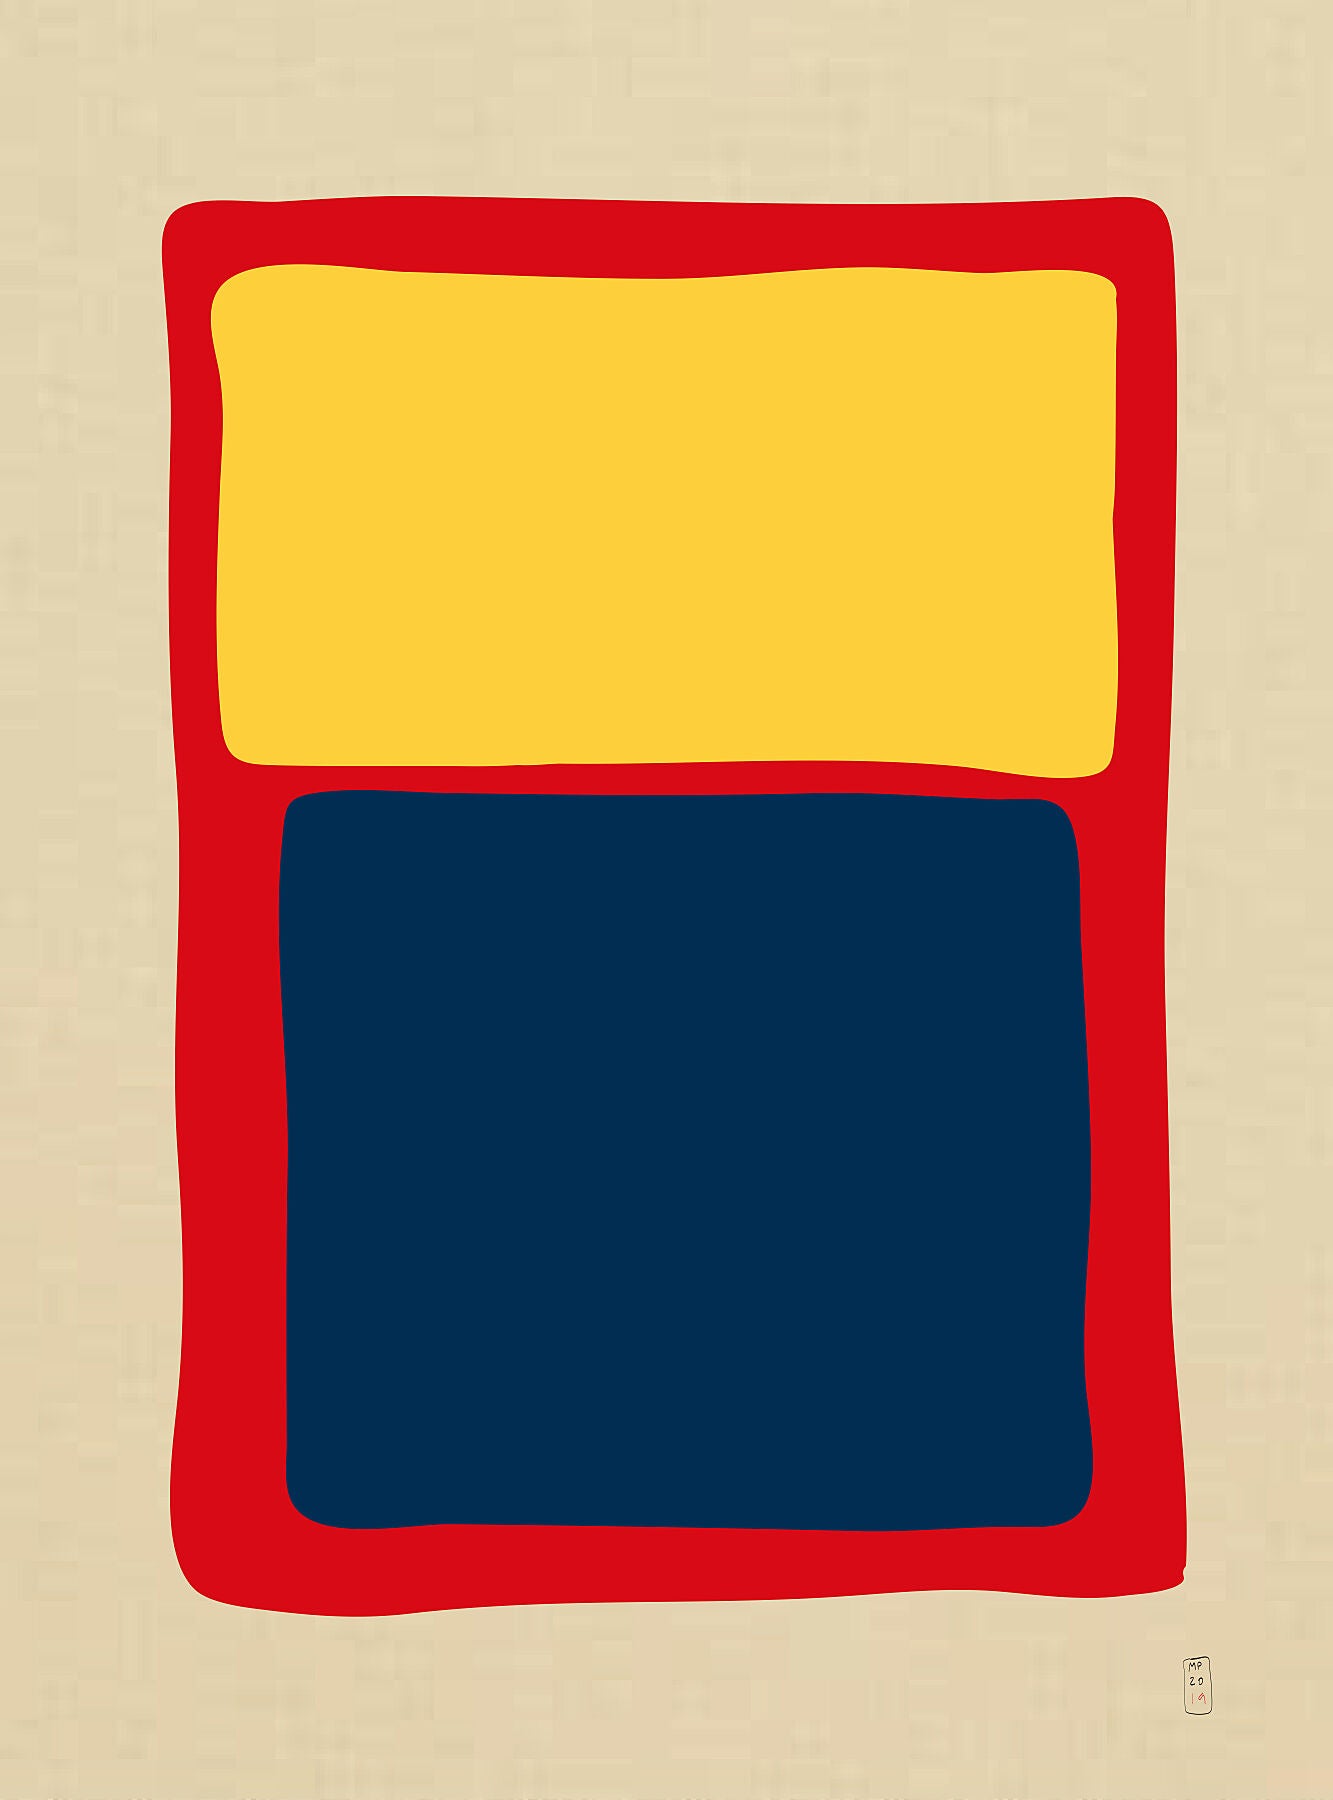 Minimalist art prints made with yellow and blue shapes on a red background, Giclée print, framed, Hahnemühle Photo Rag paper stock, archival quality for 100+ years